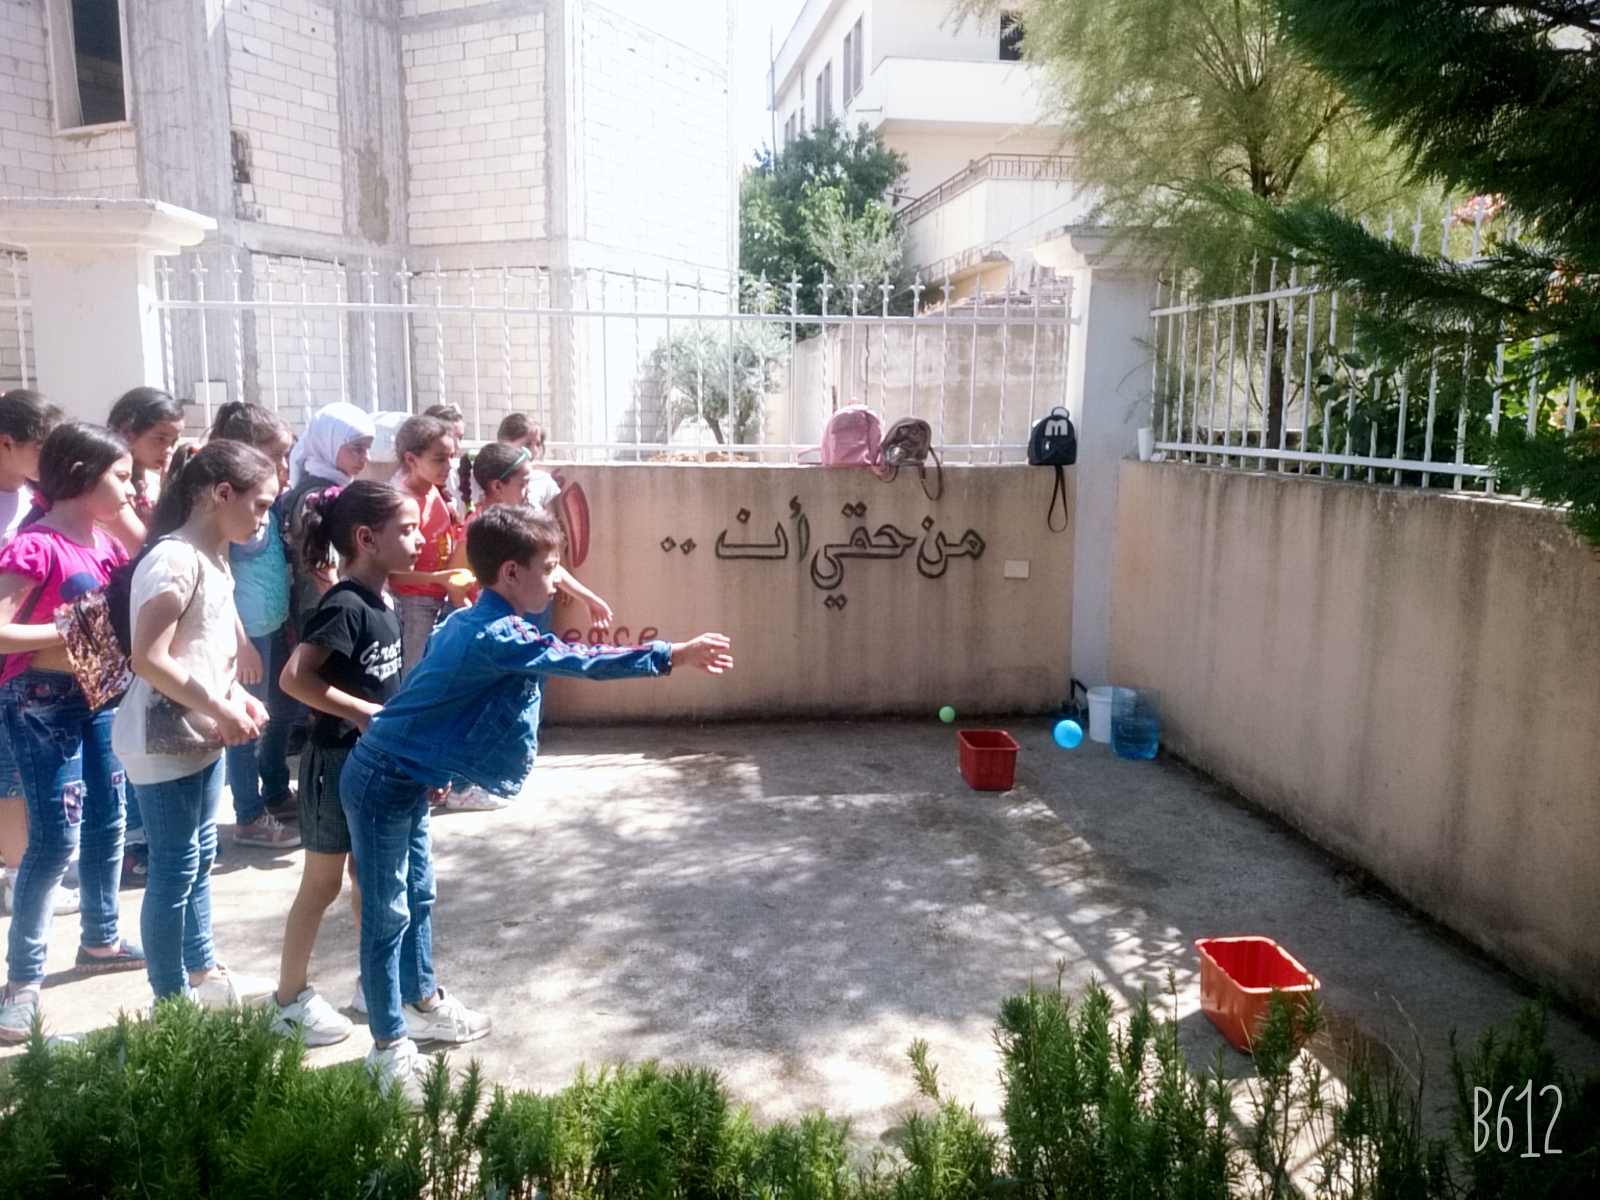 Students playing in the schoolyard in the al-Beqaa region in Lebanon (Gharsa Education Center)